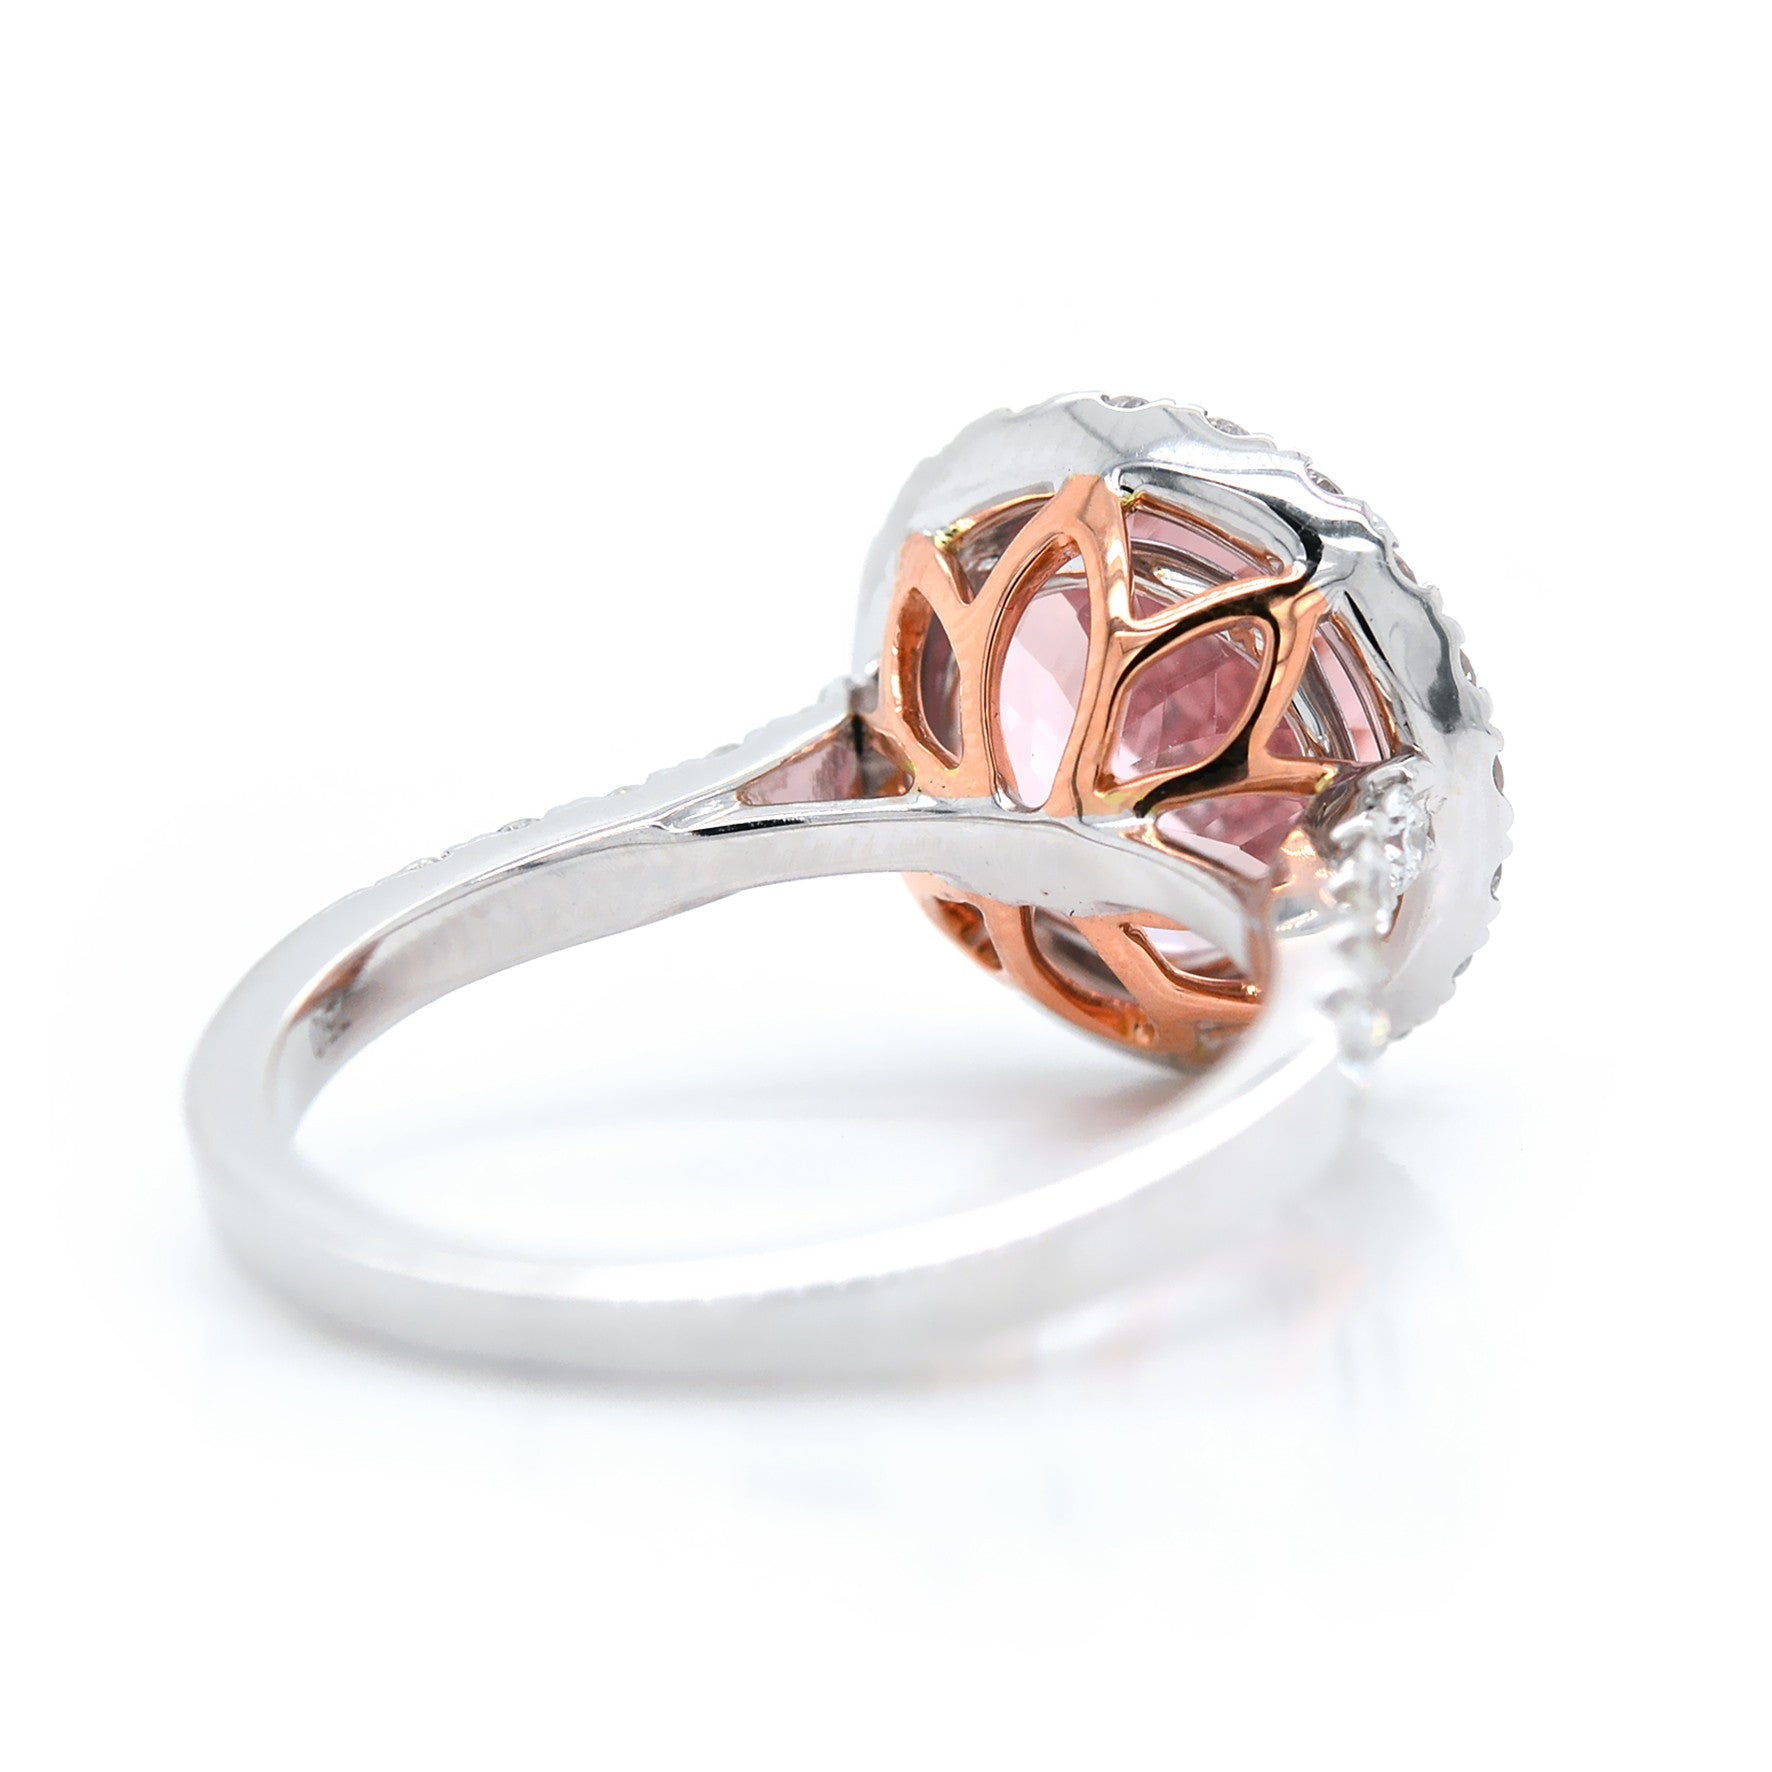 Round Morganite Dress Ring with a Halo of Diamonds - ForeverJewels Design Studio 8